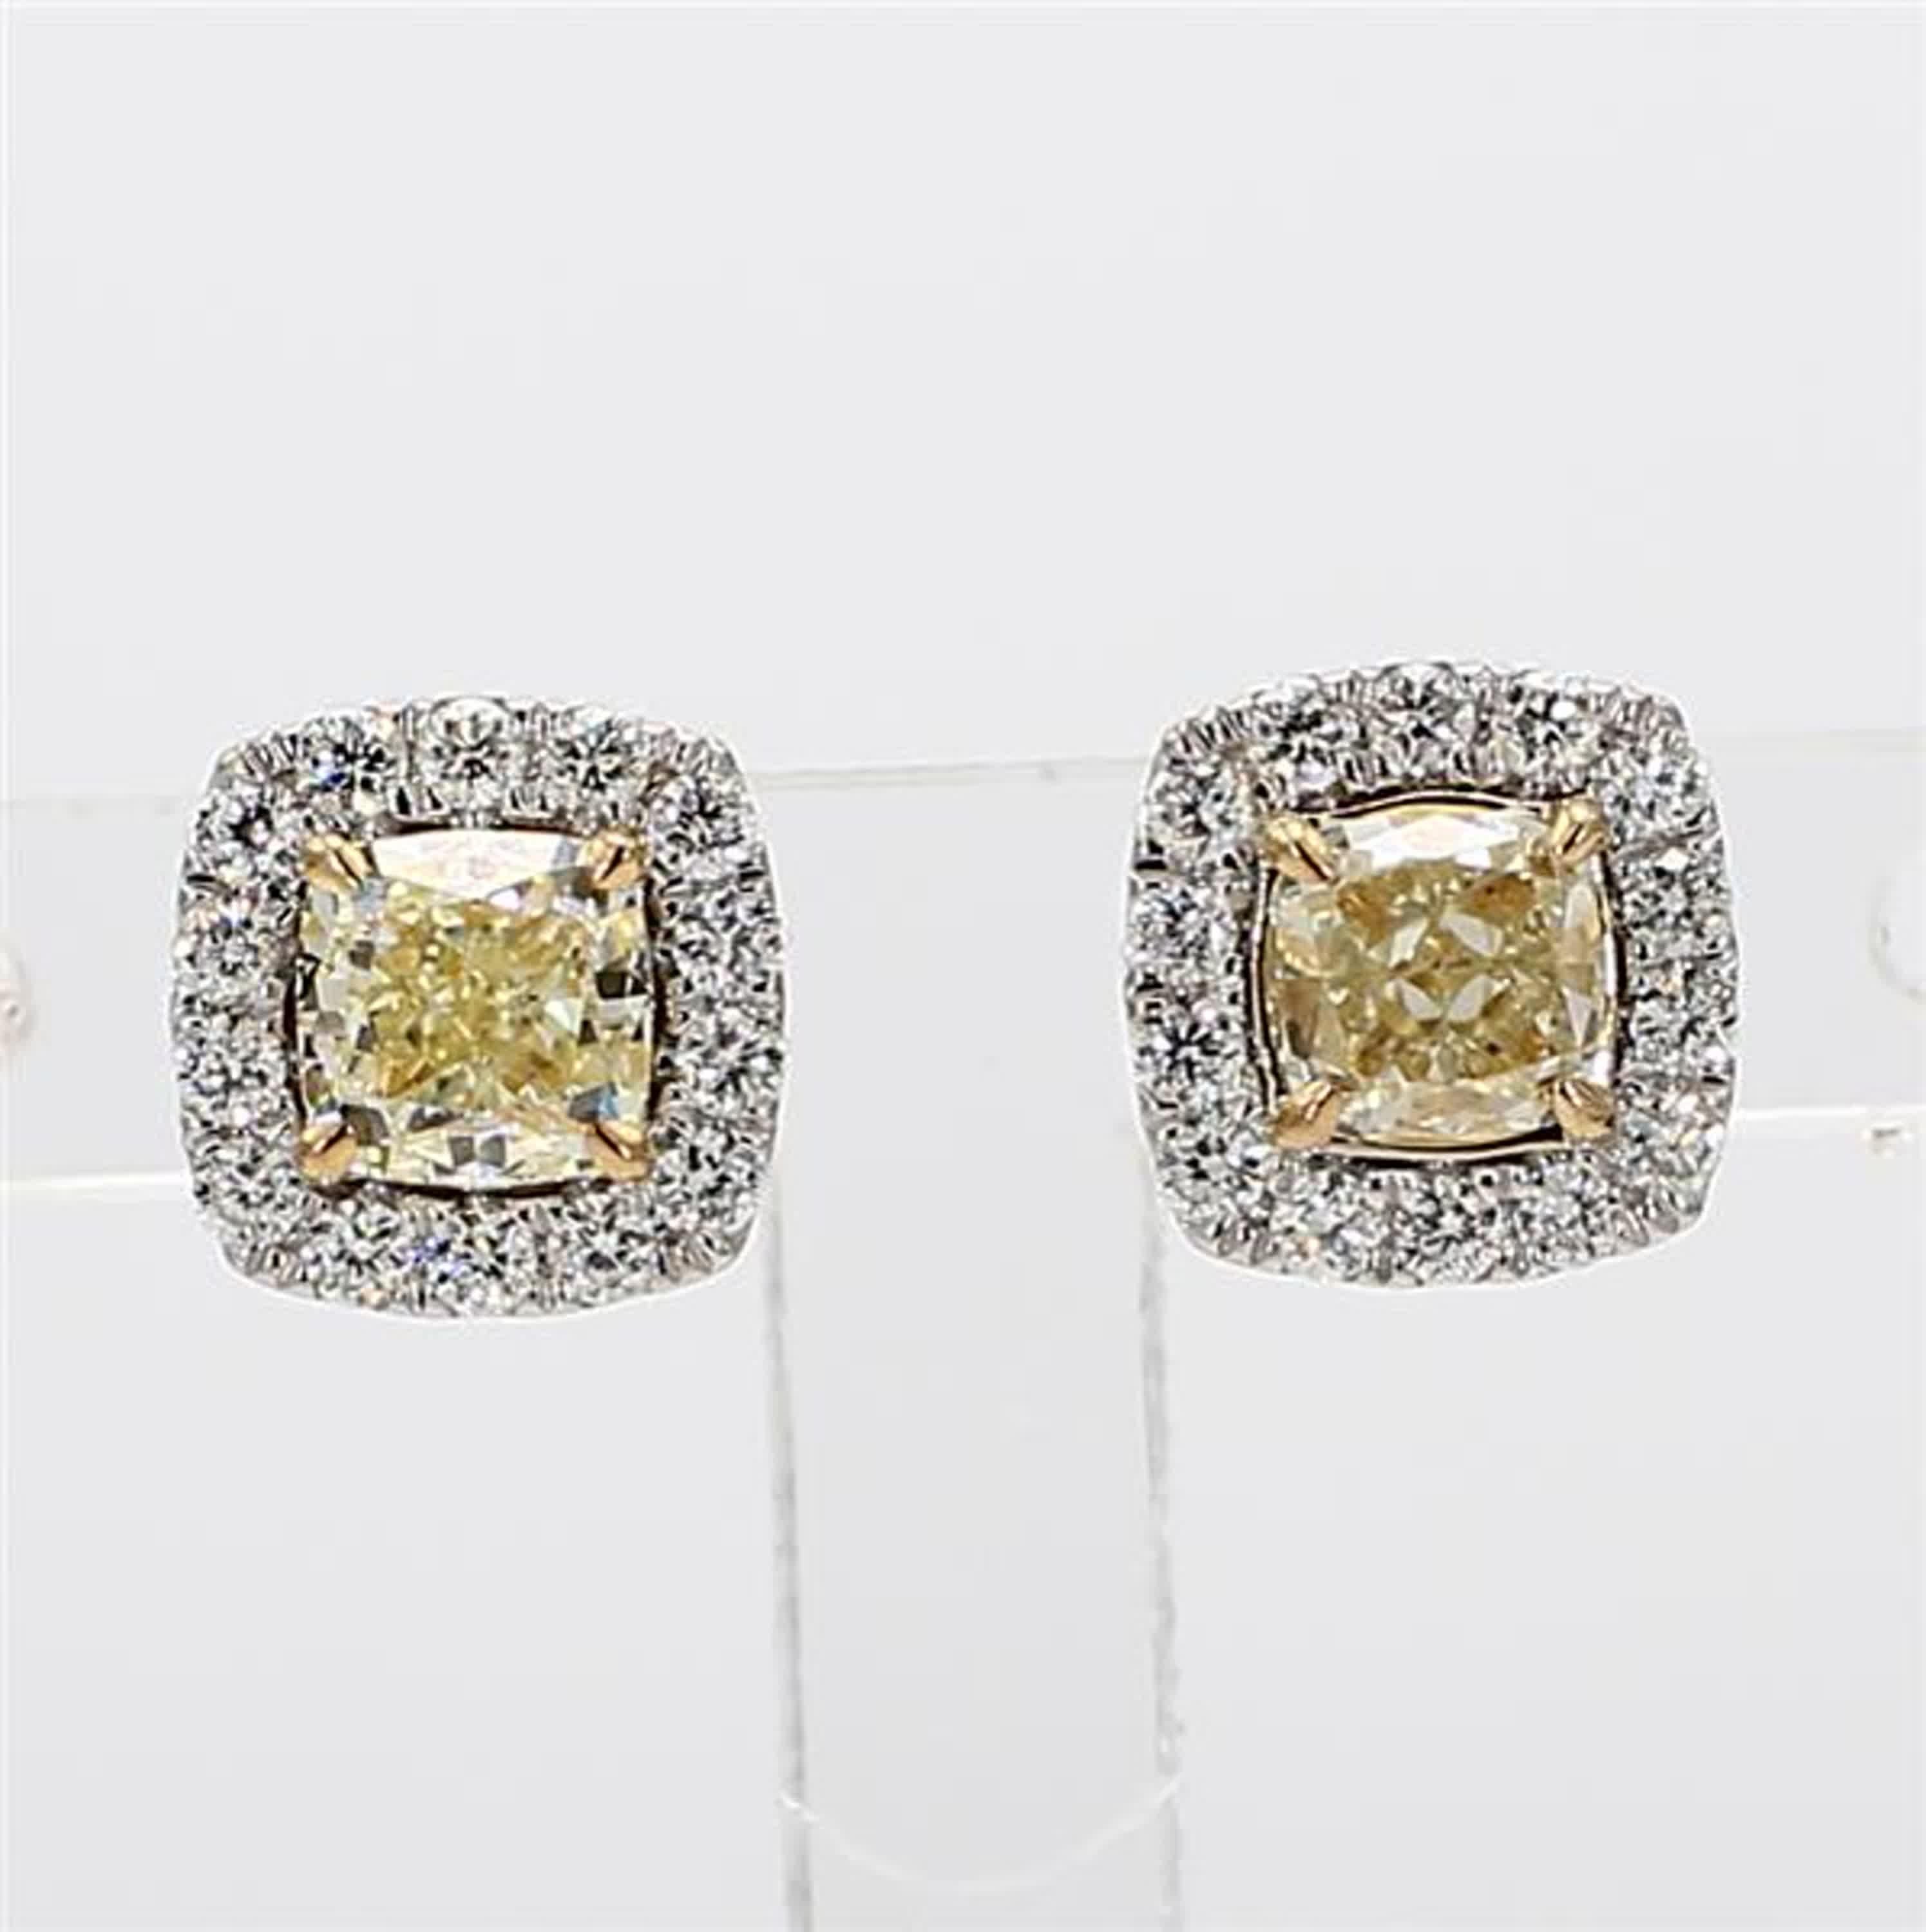 Natural Yellow Cushion and White Diamond 1.25 Carat TW Gold Stud Earrings For Sale 2